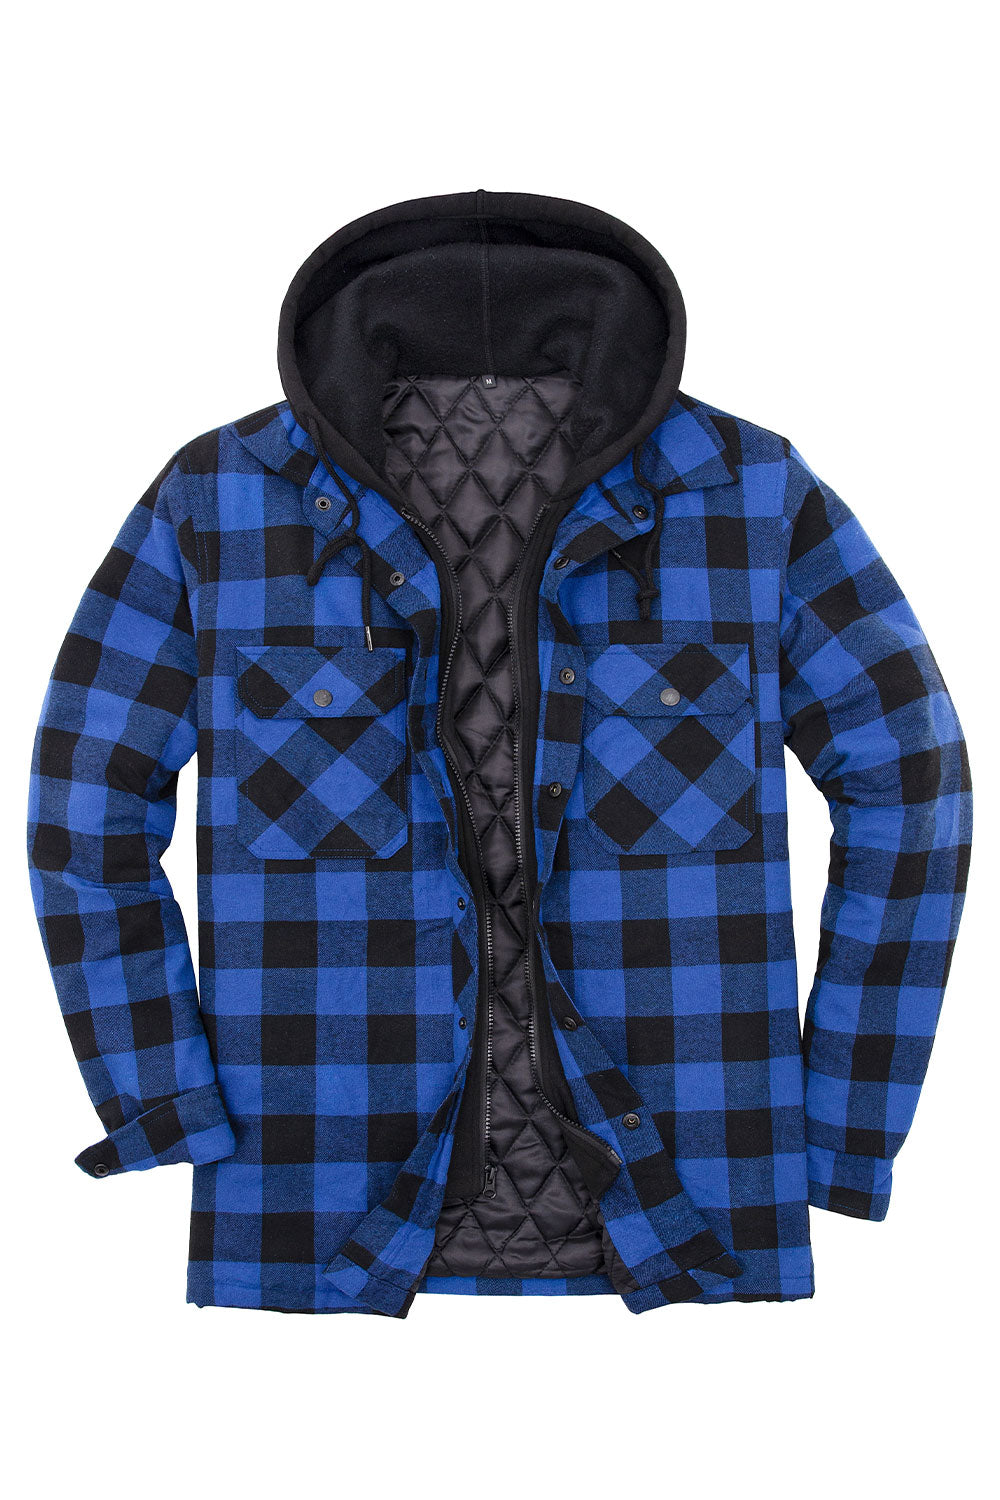 30%OFF On Father's Day Sale – FlannelGo